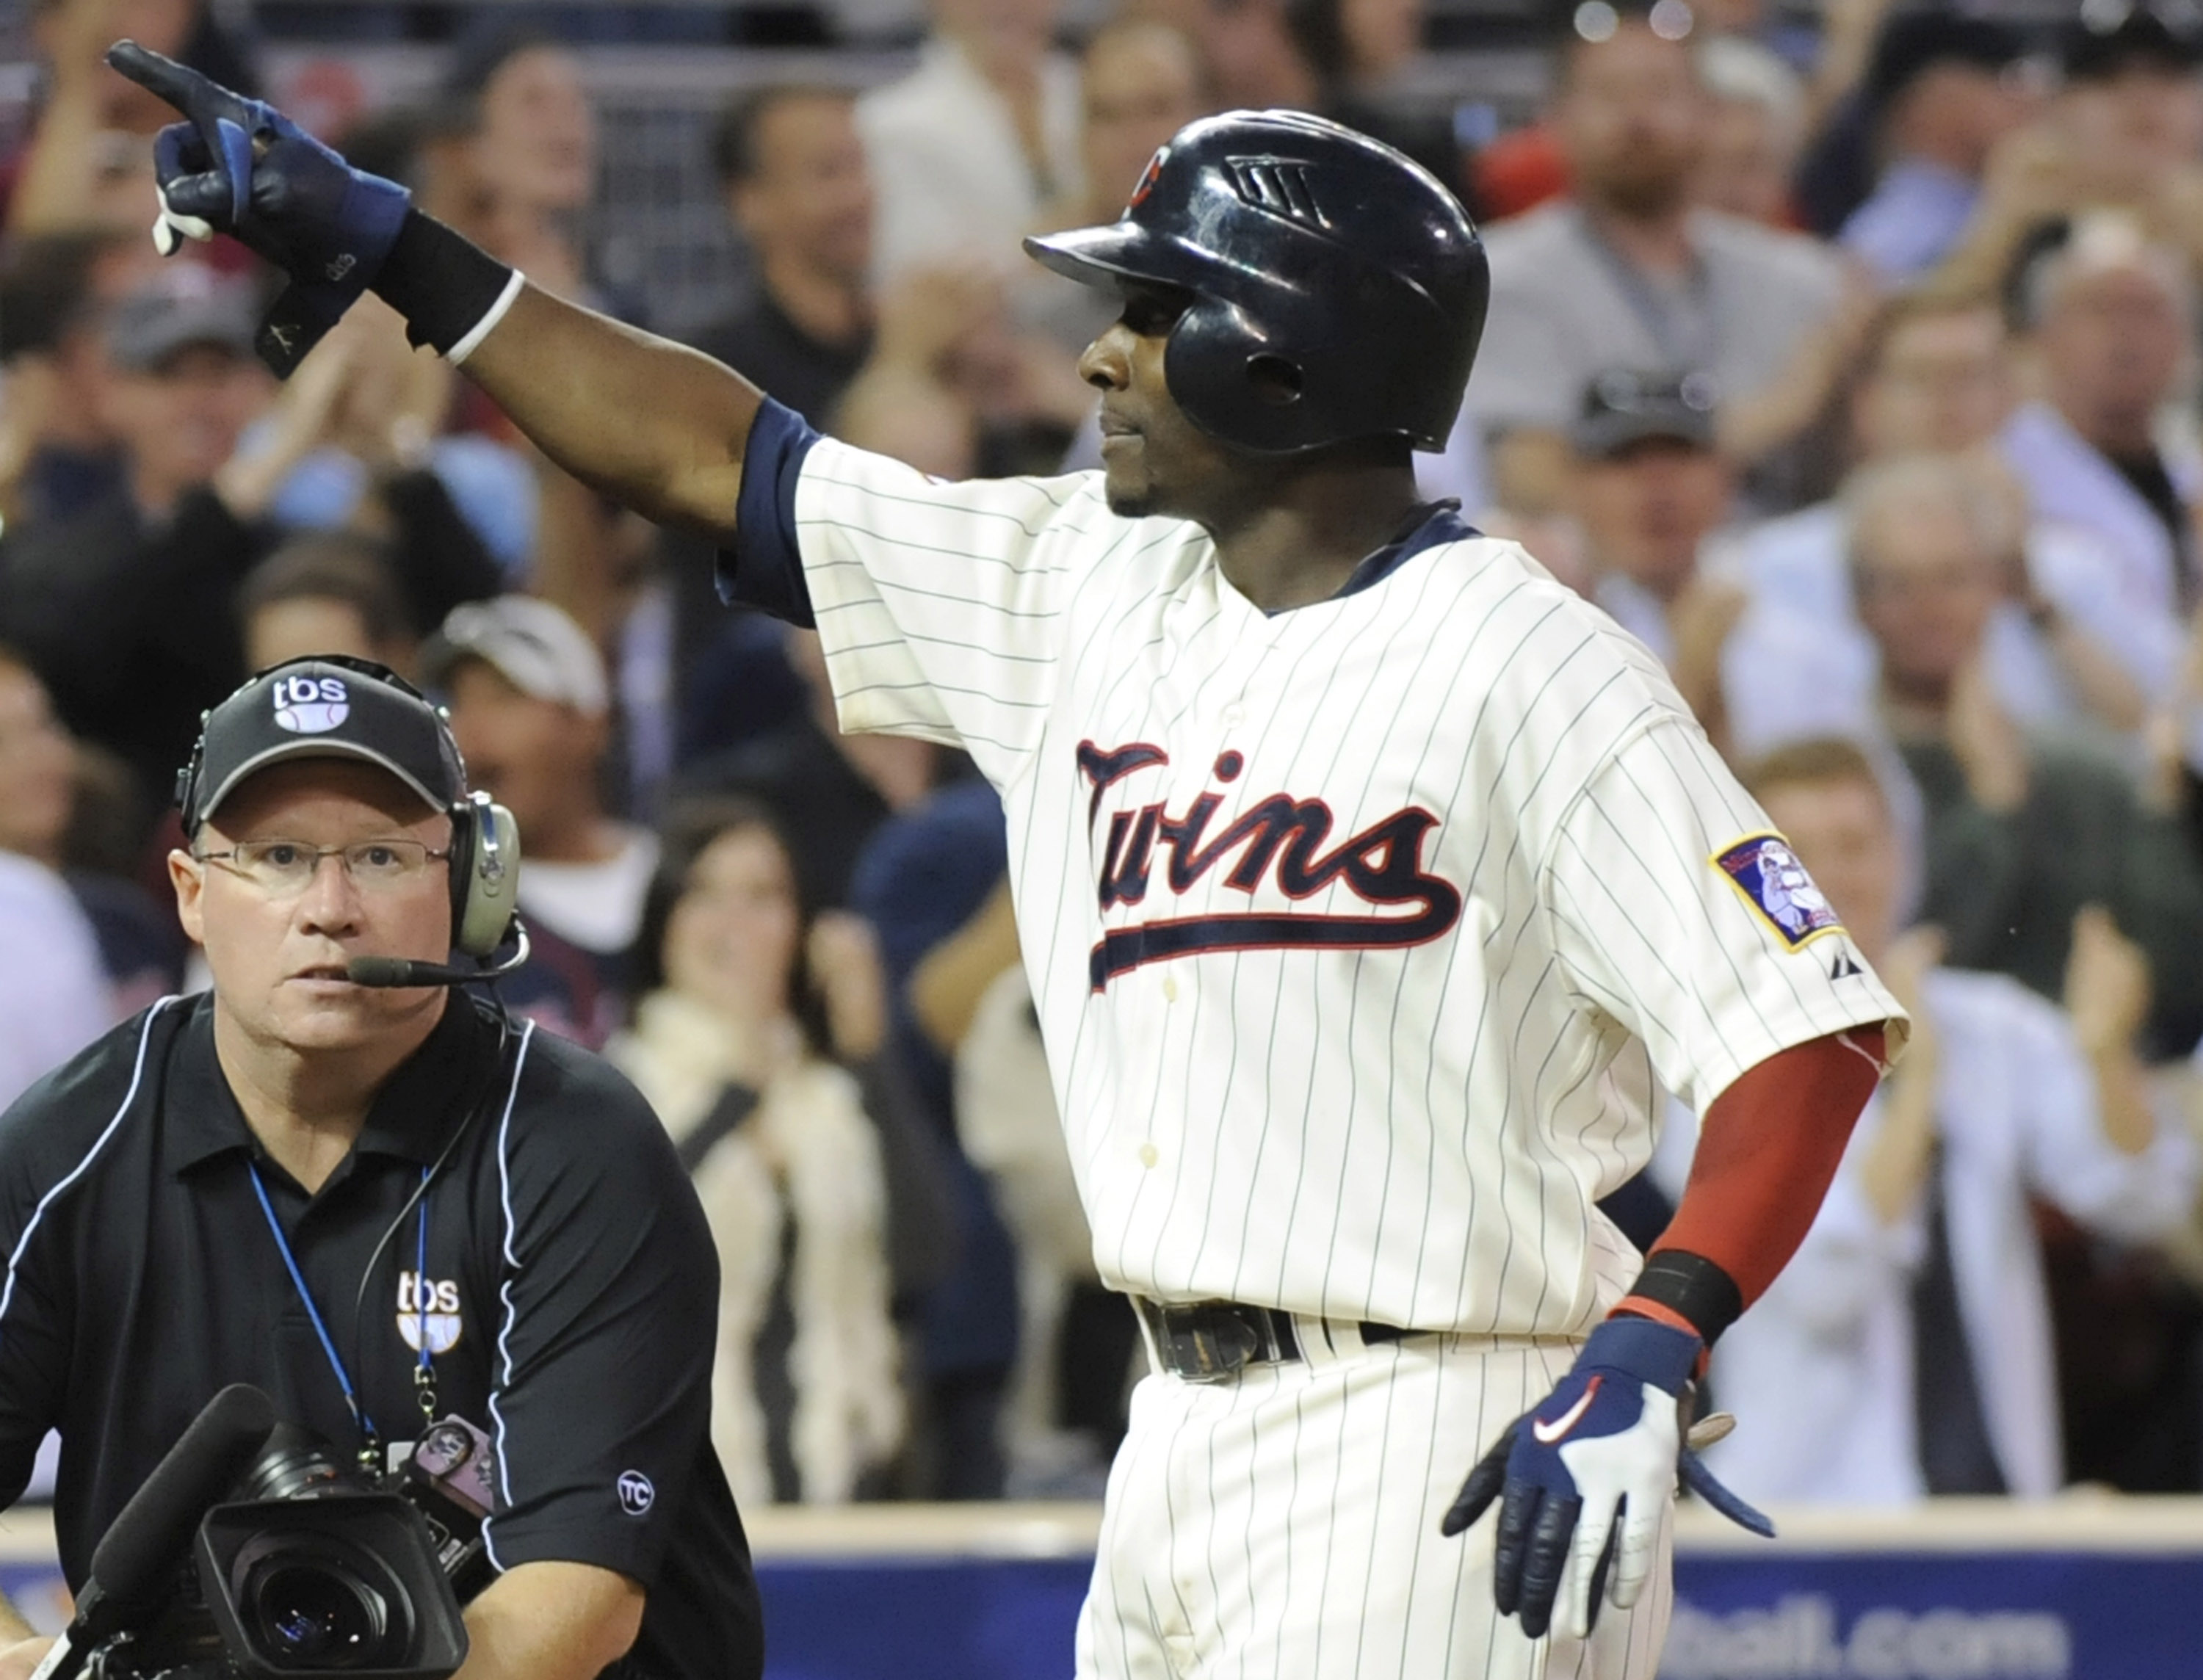 MINNEAPOLIS, MN - OCTOBER 7: Orlando Hudson #1 of the Minnesota Twins celebrates a solo home run in the sixth inning during game two of the ALDS game against the Minnesota Twins on October 7, 2010 at Target Field in Minneapolis, Minnesota.  (Photo by Hann